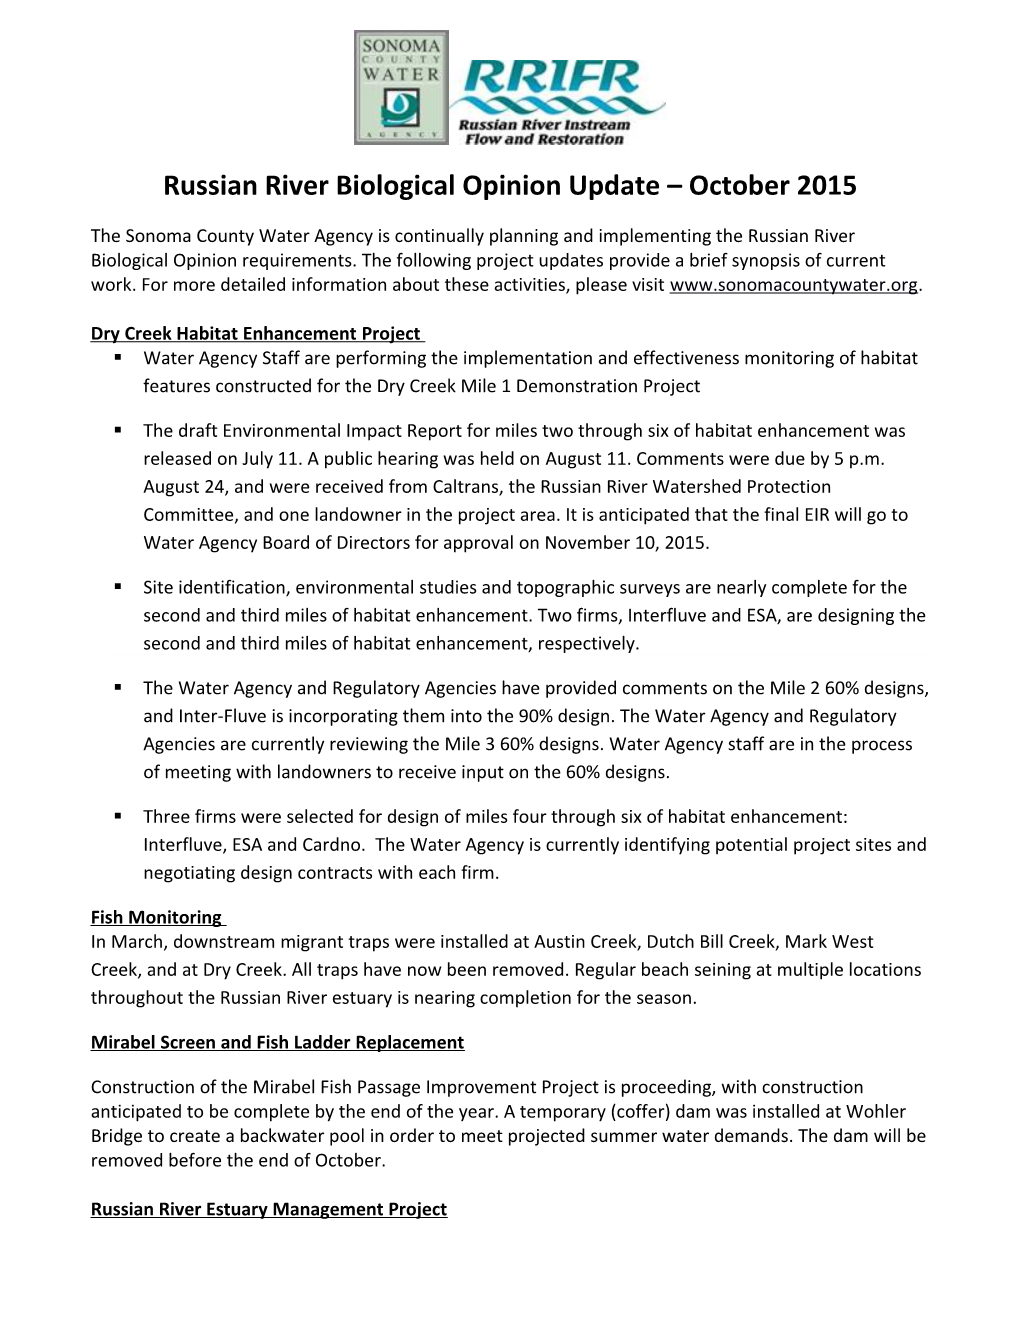 Russian River Biological Opinion Update October 2015